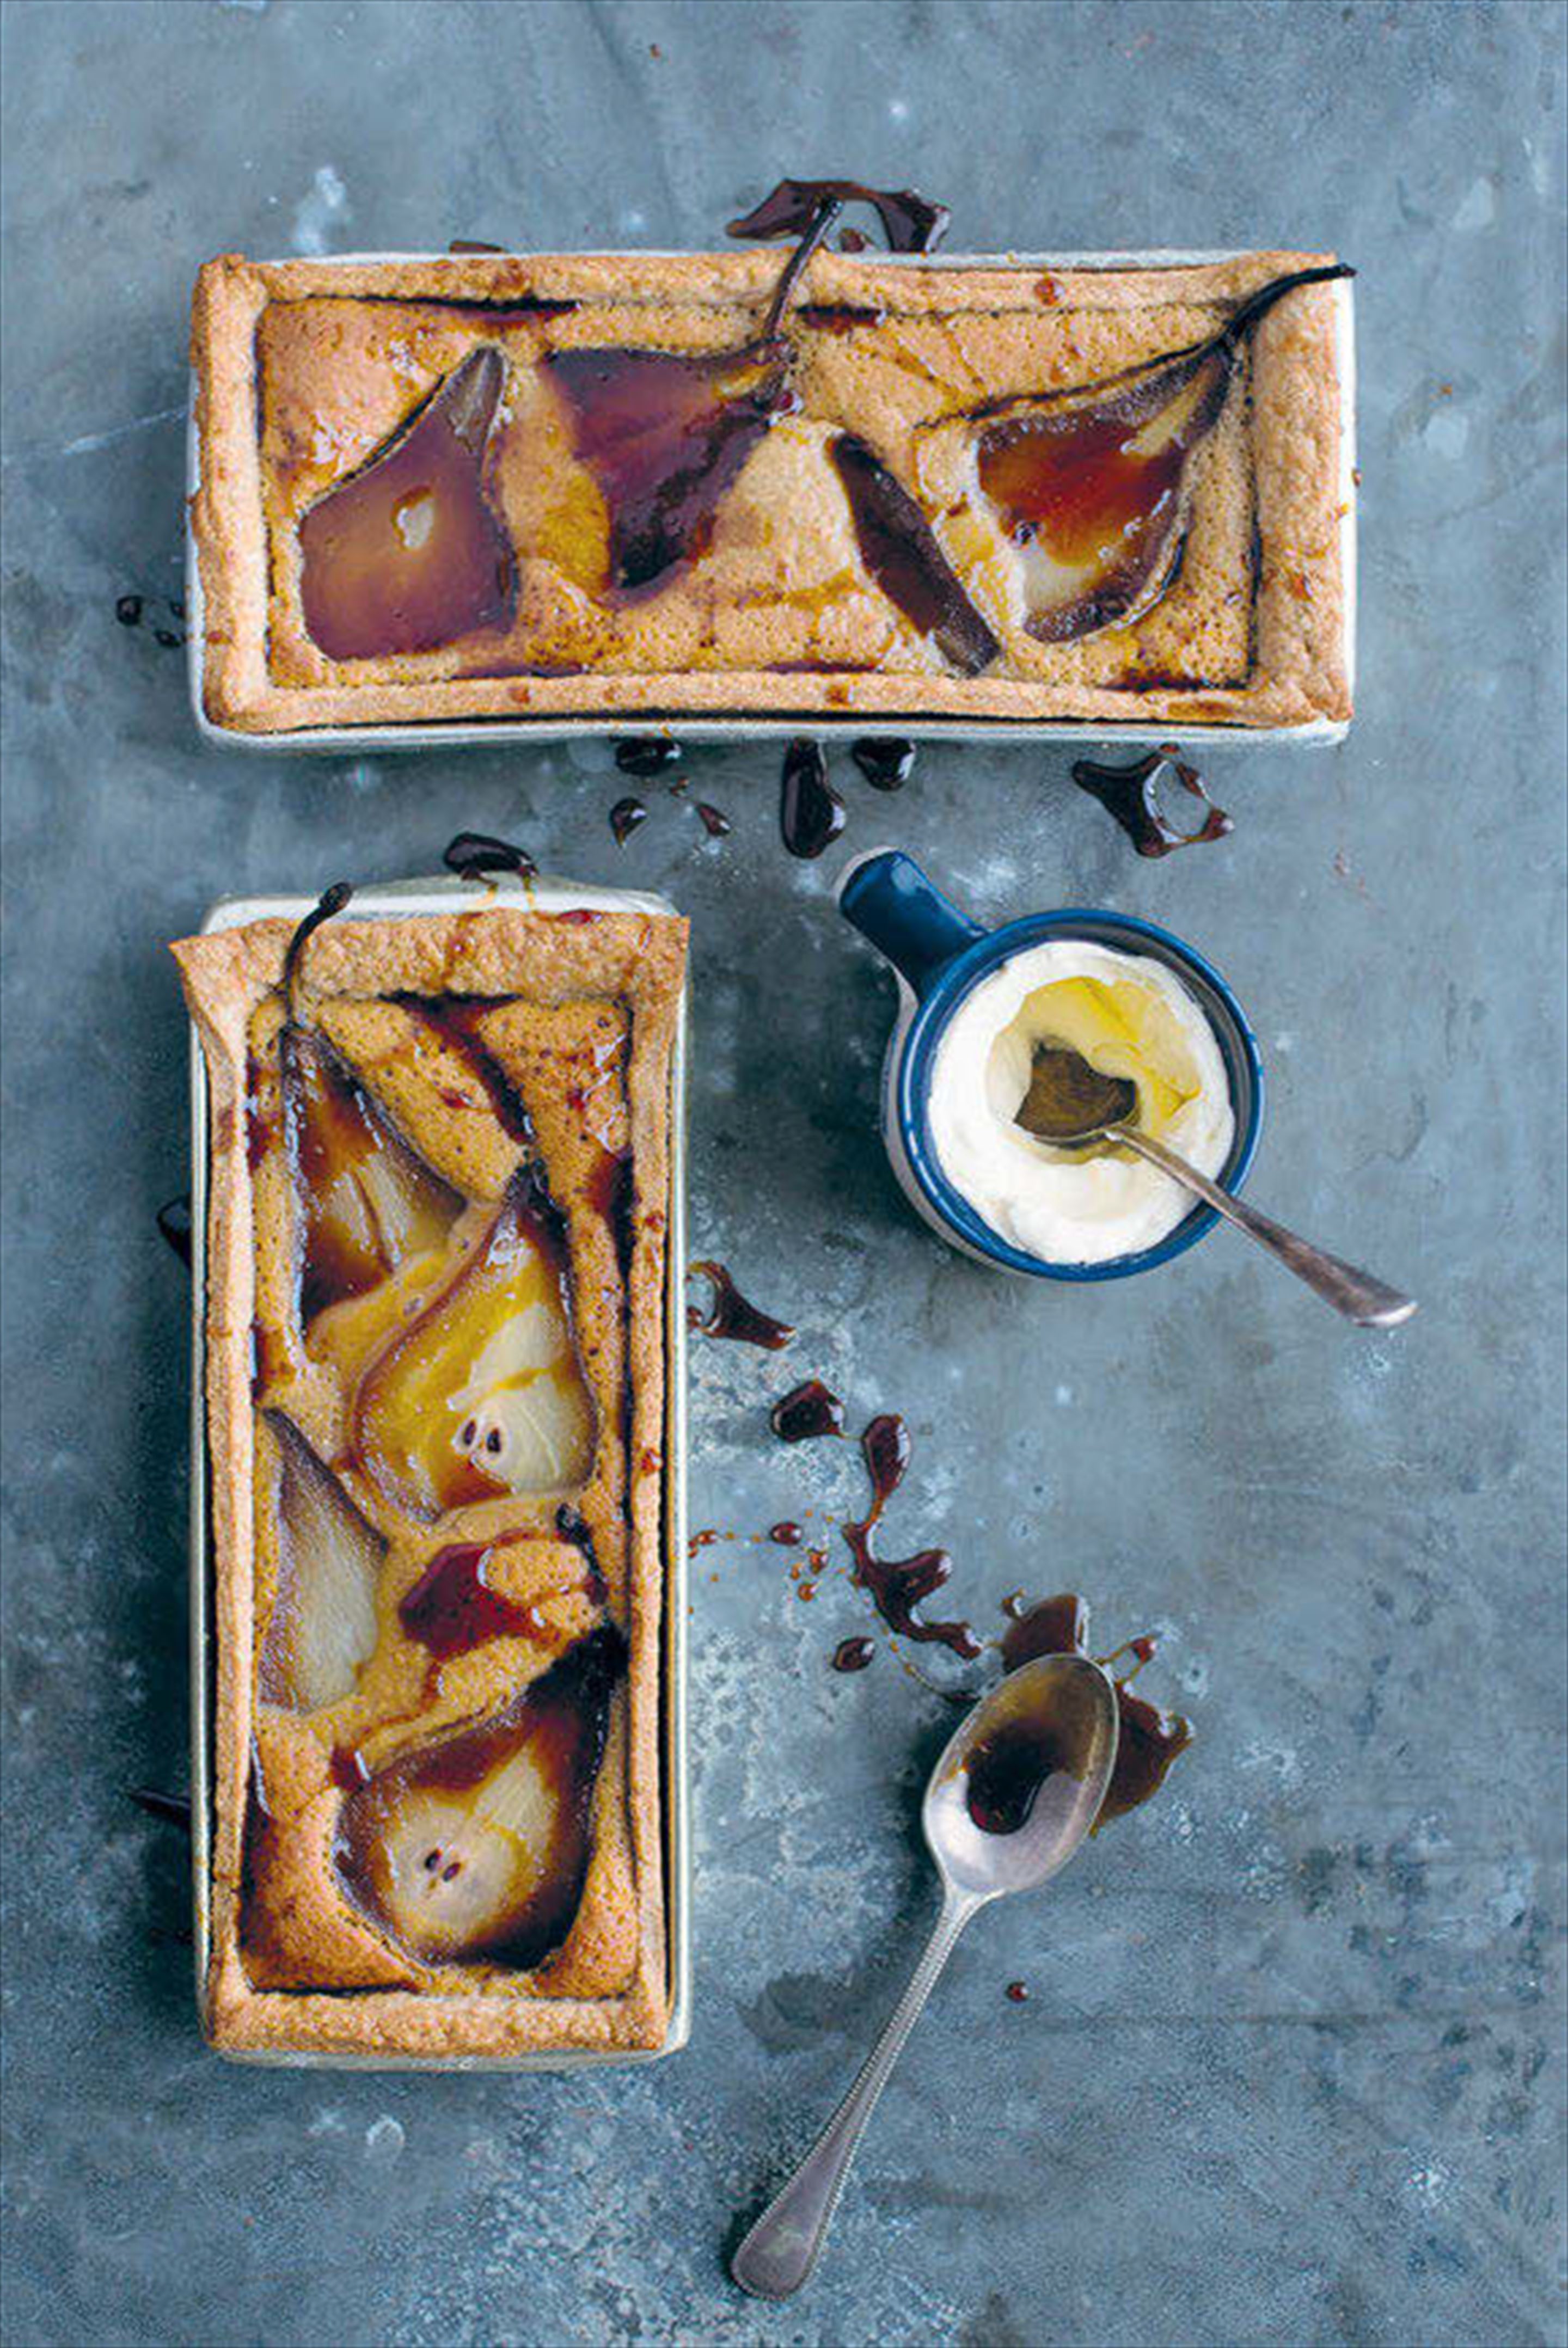 Pear, maple syrup and brown butter pies with cinnamon spelt crust